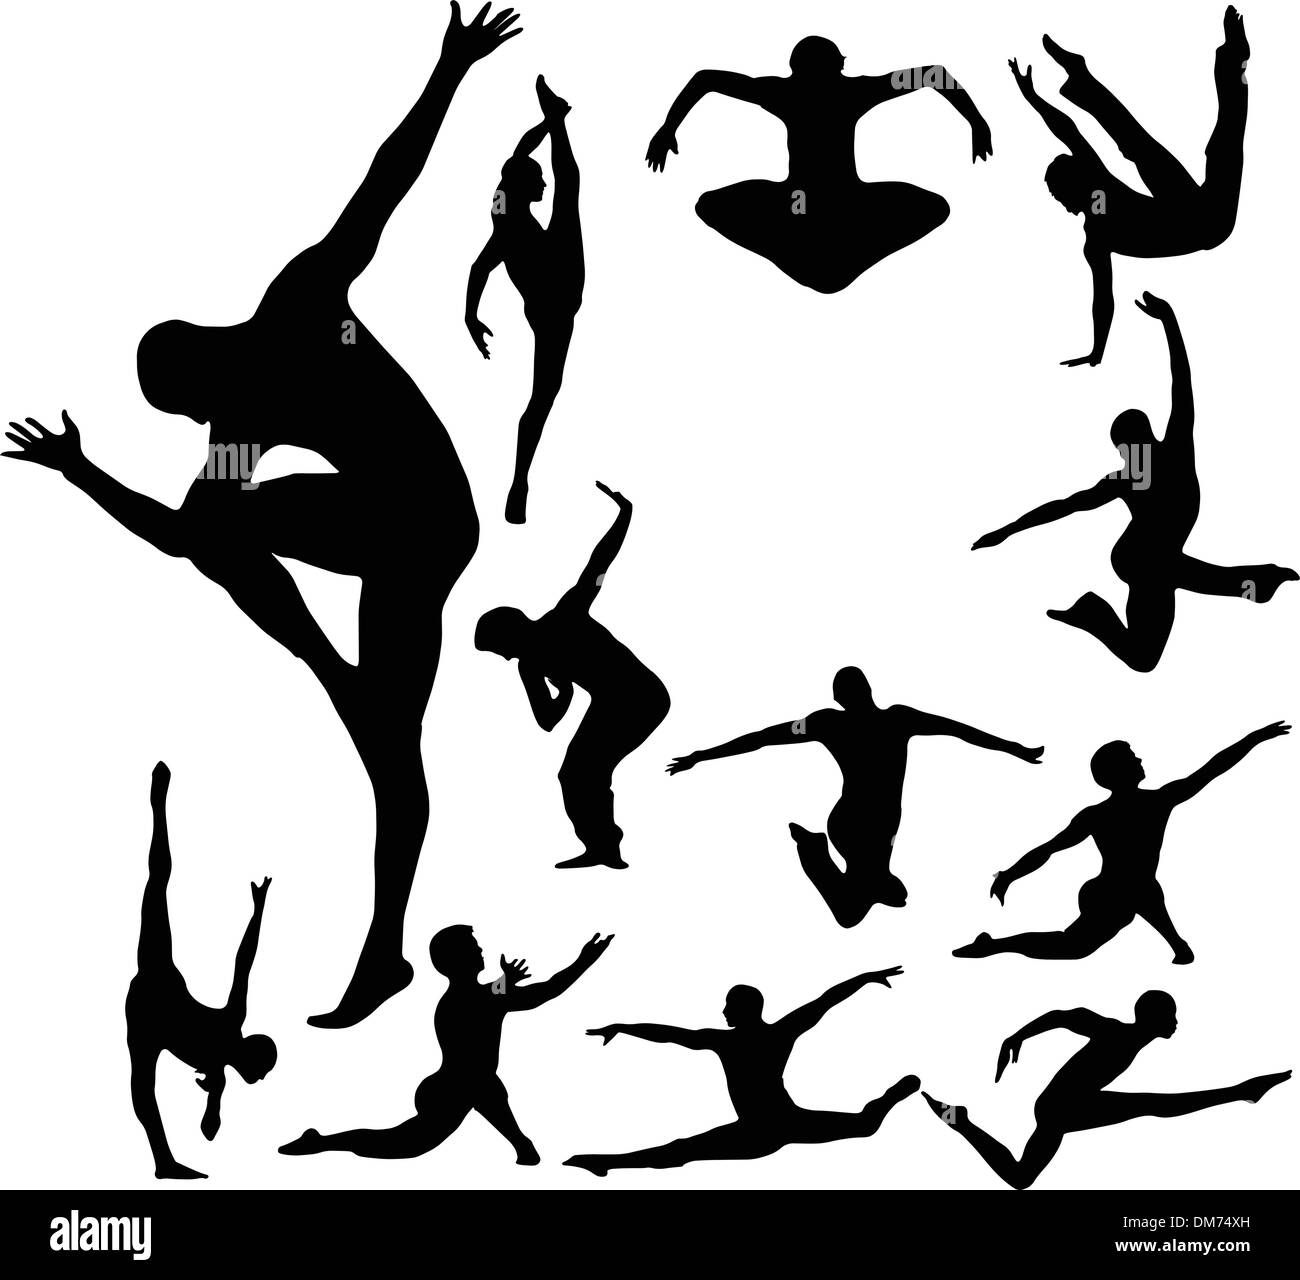 jumping silhouette vector Stock Vector